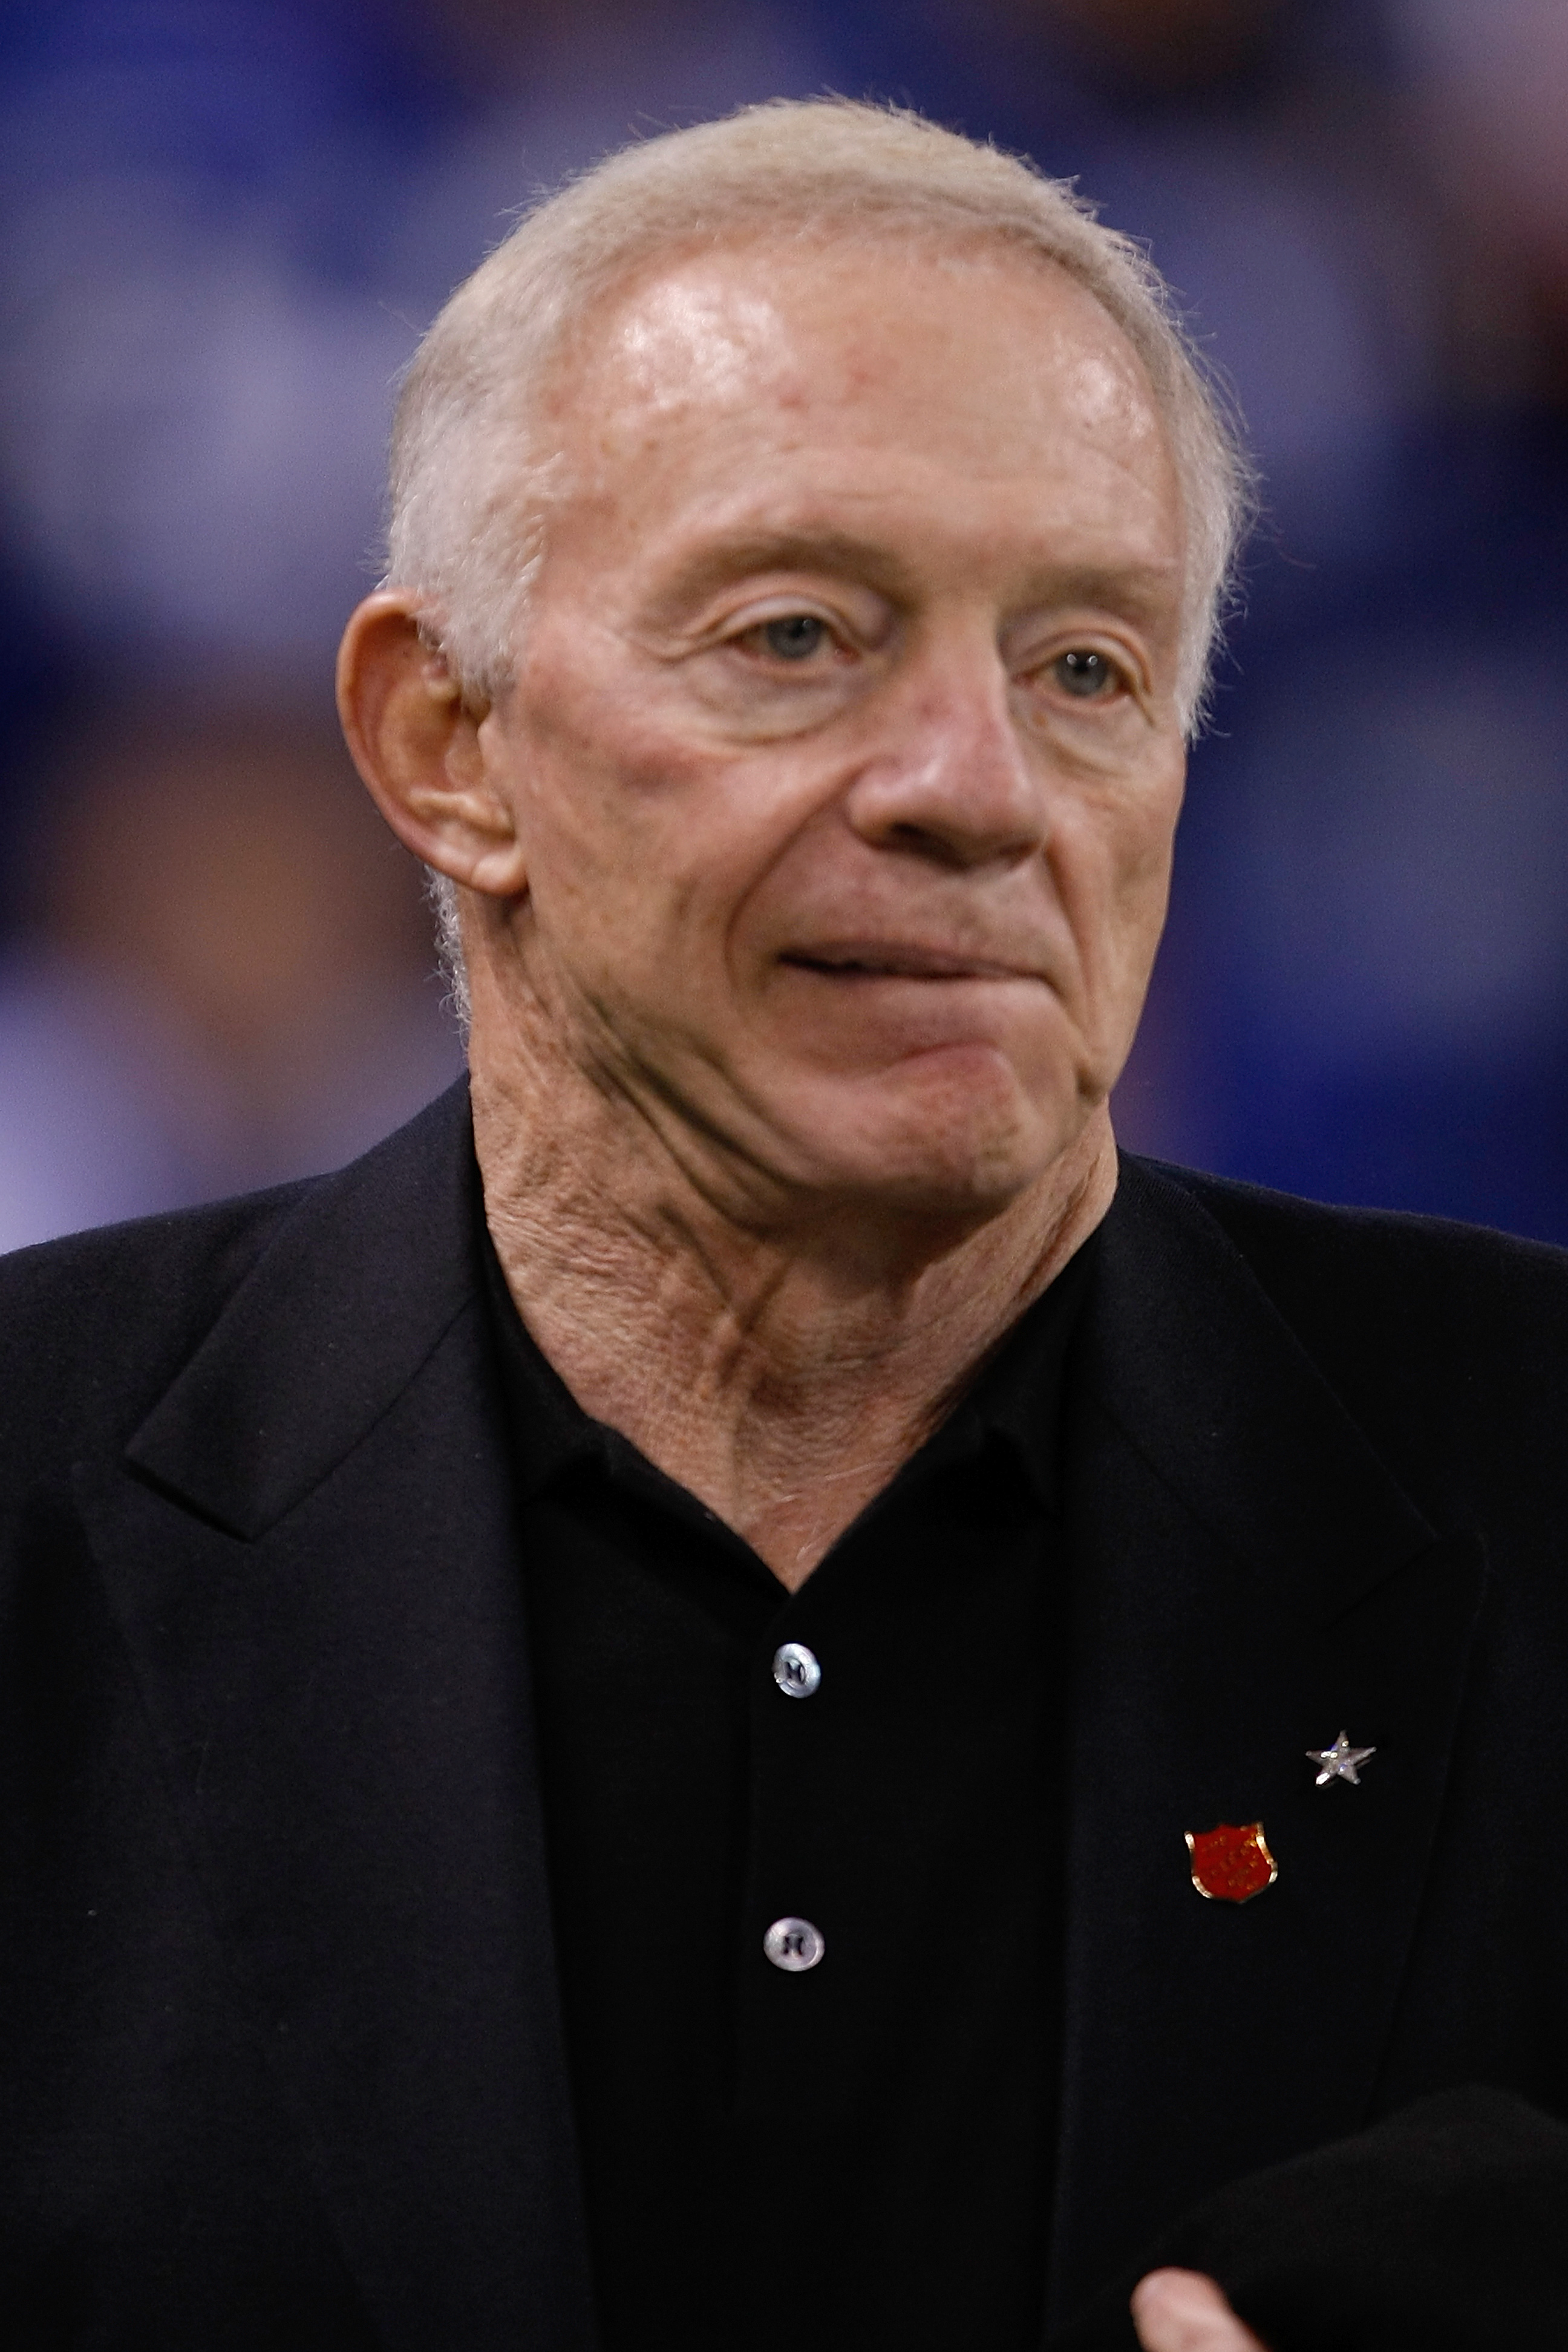 INDIANAPOLIS, IN - DECEMBER 05: Jerry Jones of the Dallas Cowboys looks on in warmups prior to the game against the Indianapolis Colts at Lucas Oil Stadium on December 5, 2010 in Indianapolis, Indiana.  (Photo by Scott Boehm/Getty Images)